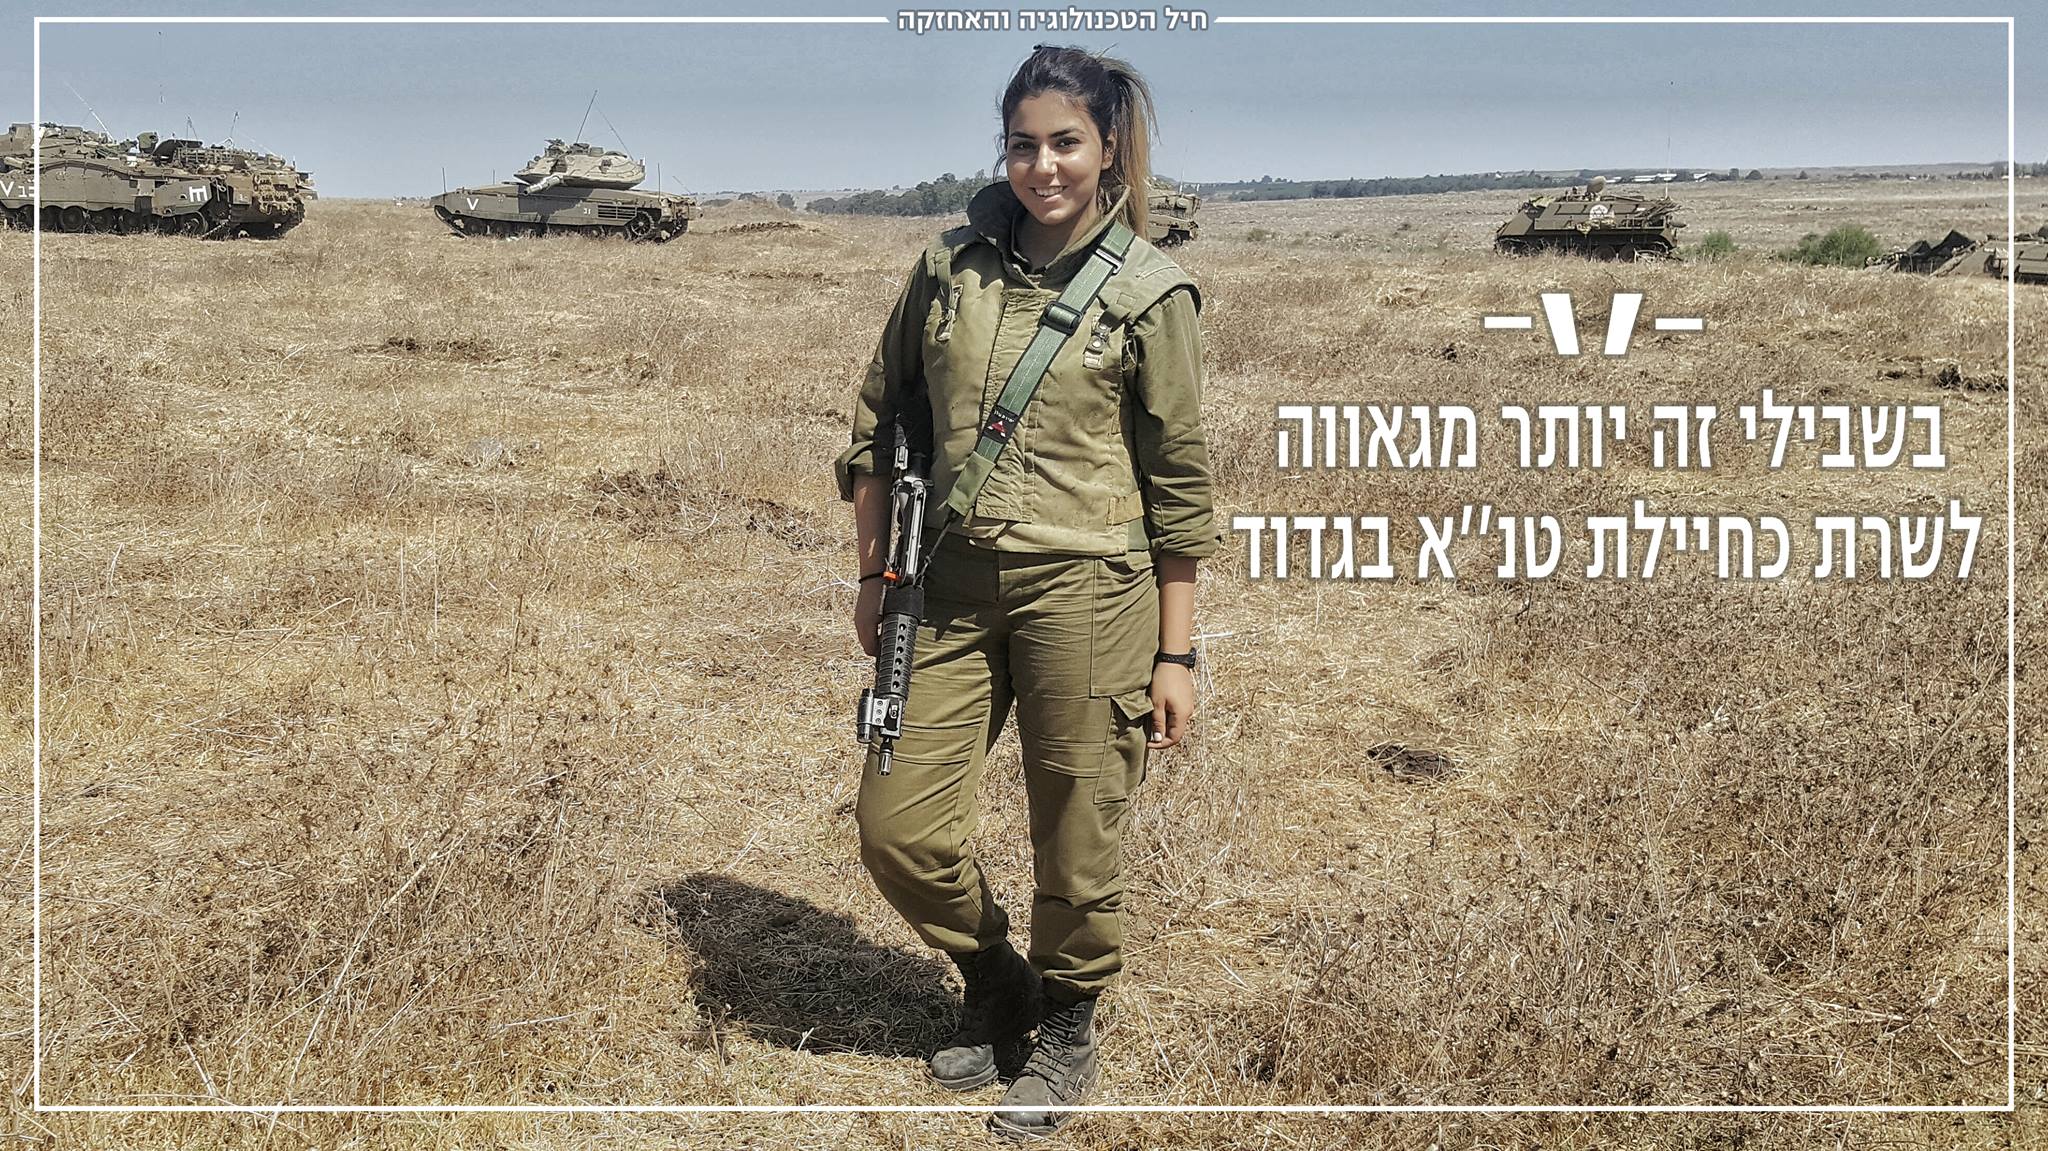 Israel's women combat soldiers on frontline of battle for equality ...